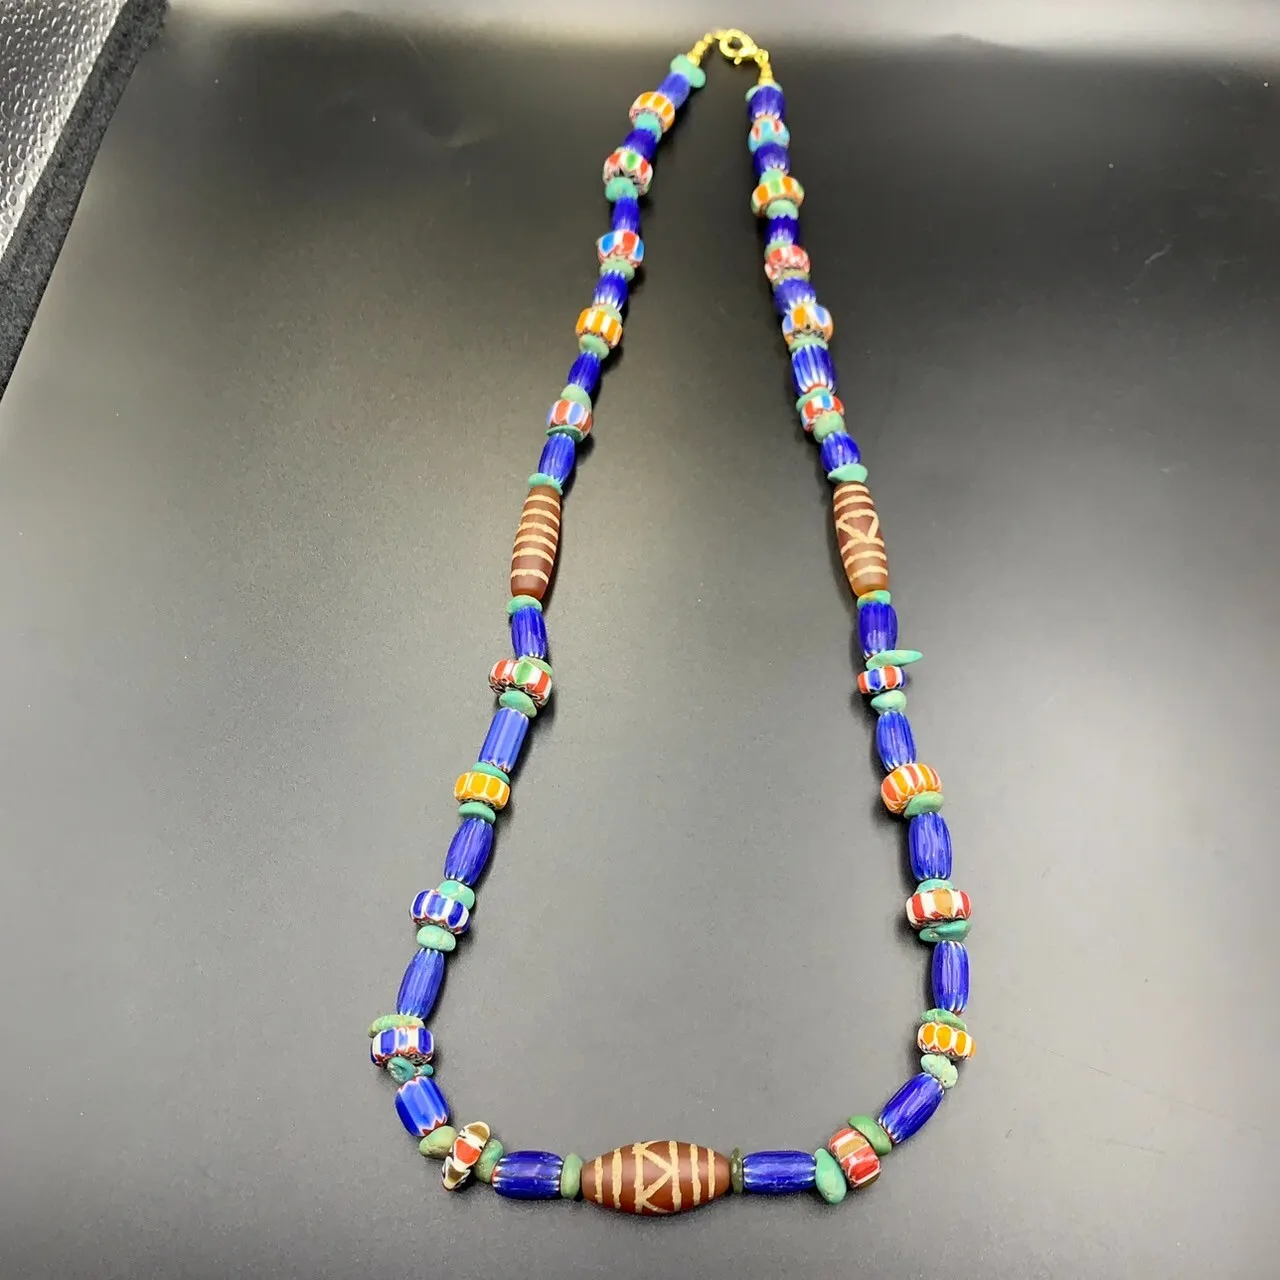 Beautiful Chevron Trade Glass Beads With Antique Etched Agate Beads Necklace, LBBR-30 - Image 3 of 6